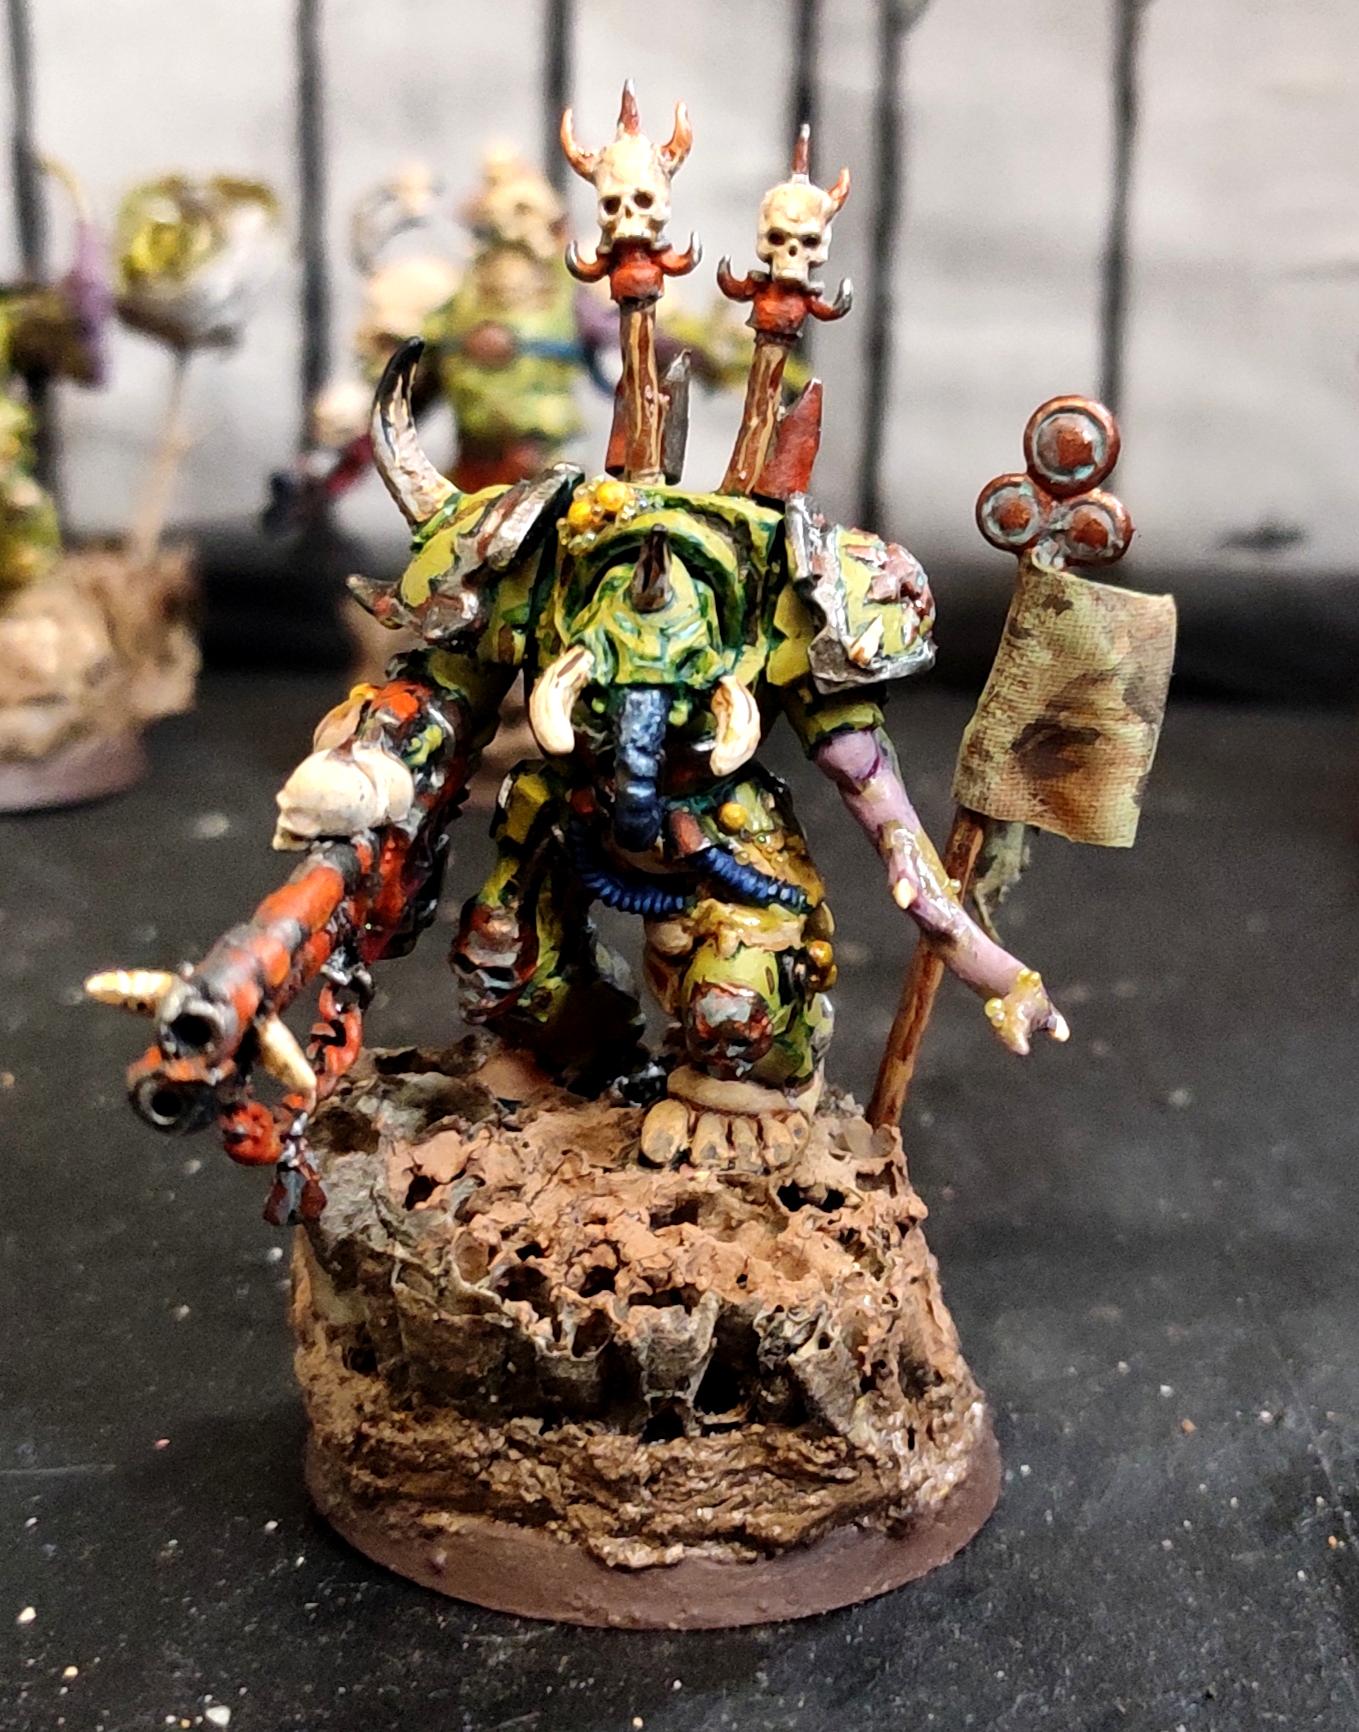 Blight, Casting, Chaos, Chaos Space Marines, Conversion, Death Guard, Decay, Disease, Heresy, Heretic Astartes, Infantry, Nurgle, Pestilence, Plague, Plague Marines, Reaper Autocannon, Rot, Rust, Sculpting, Tentacle, Terminator Armor, Traitor Legions, Warhammer 40,000, Wasp Nest